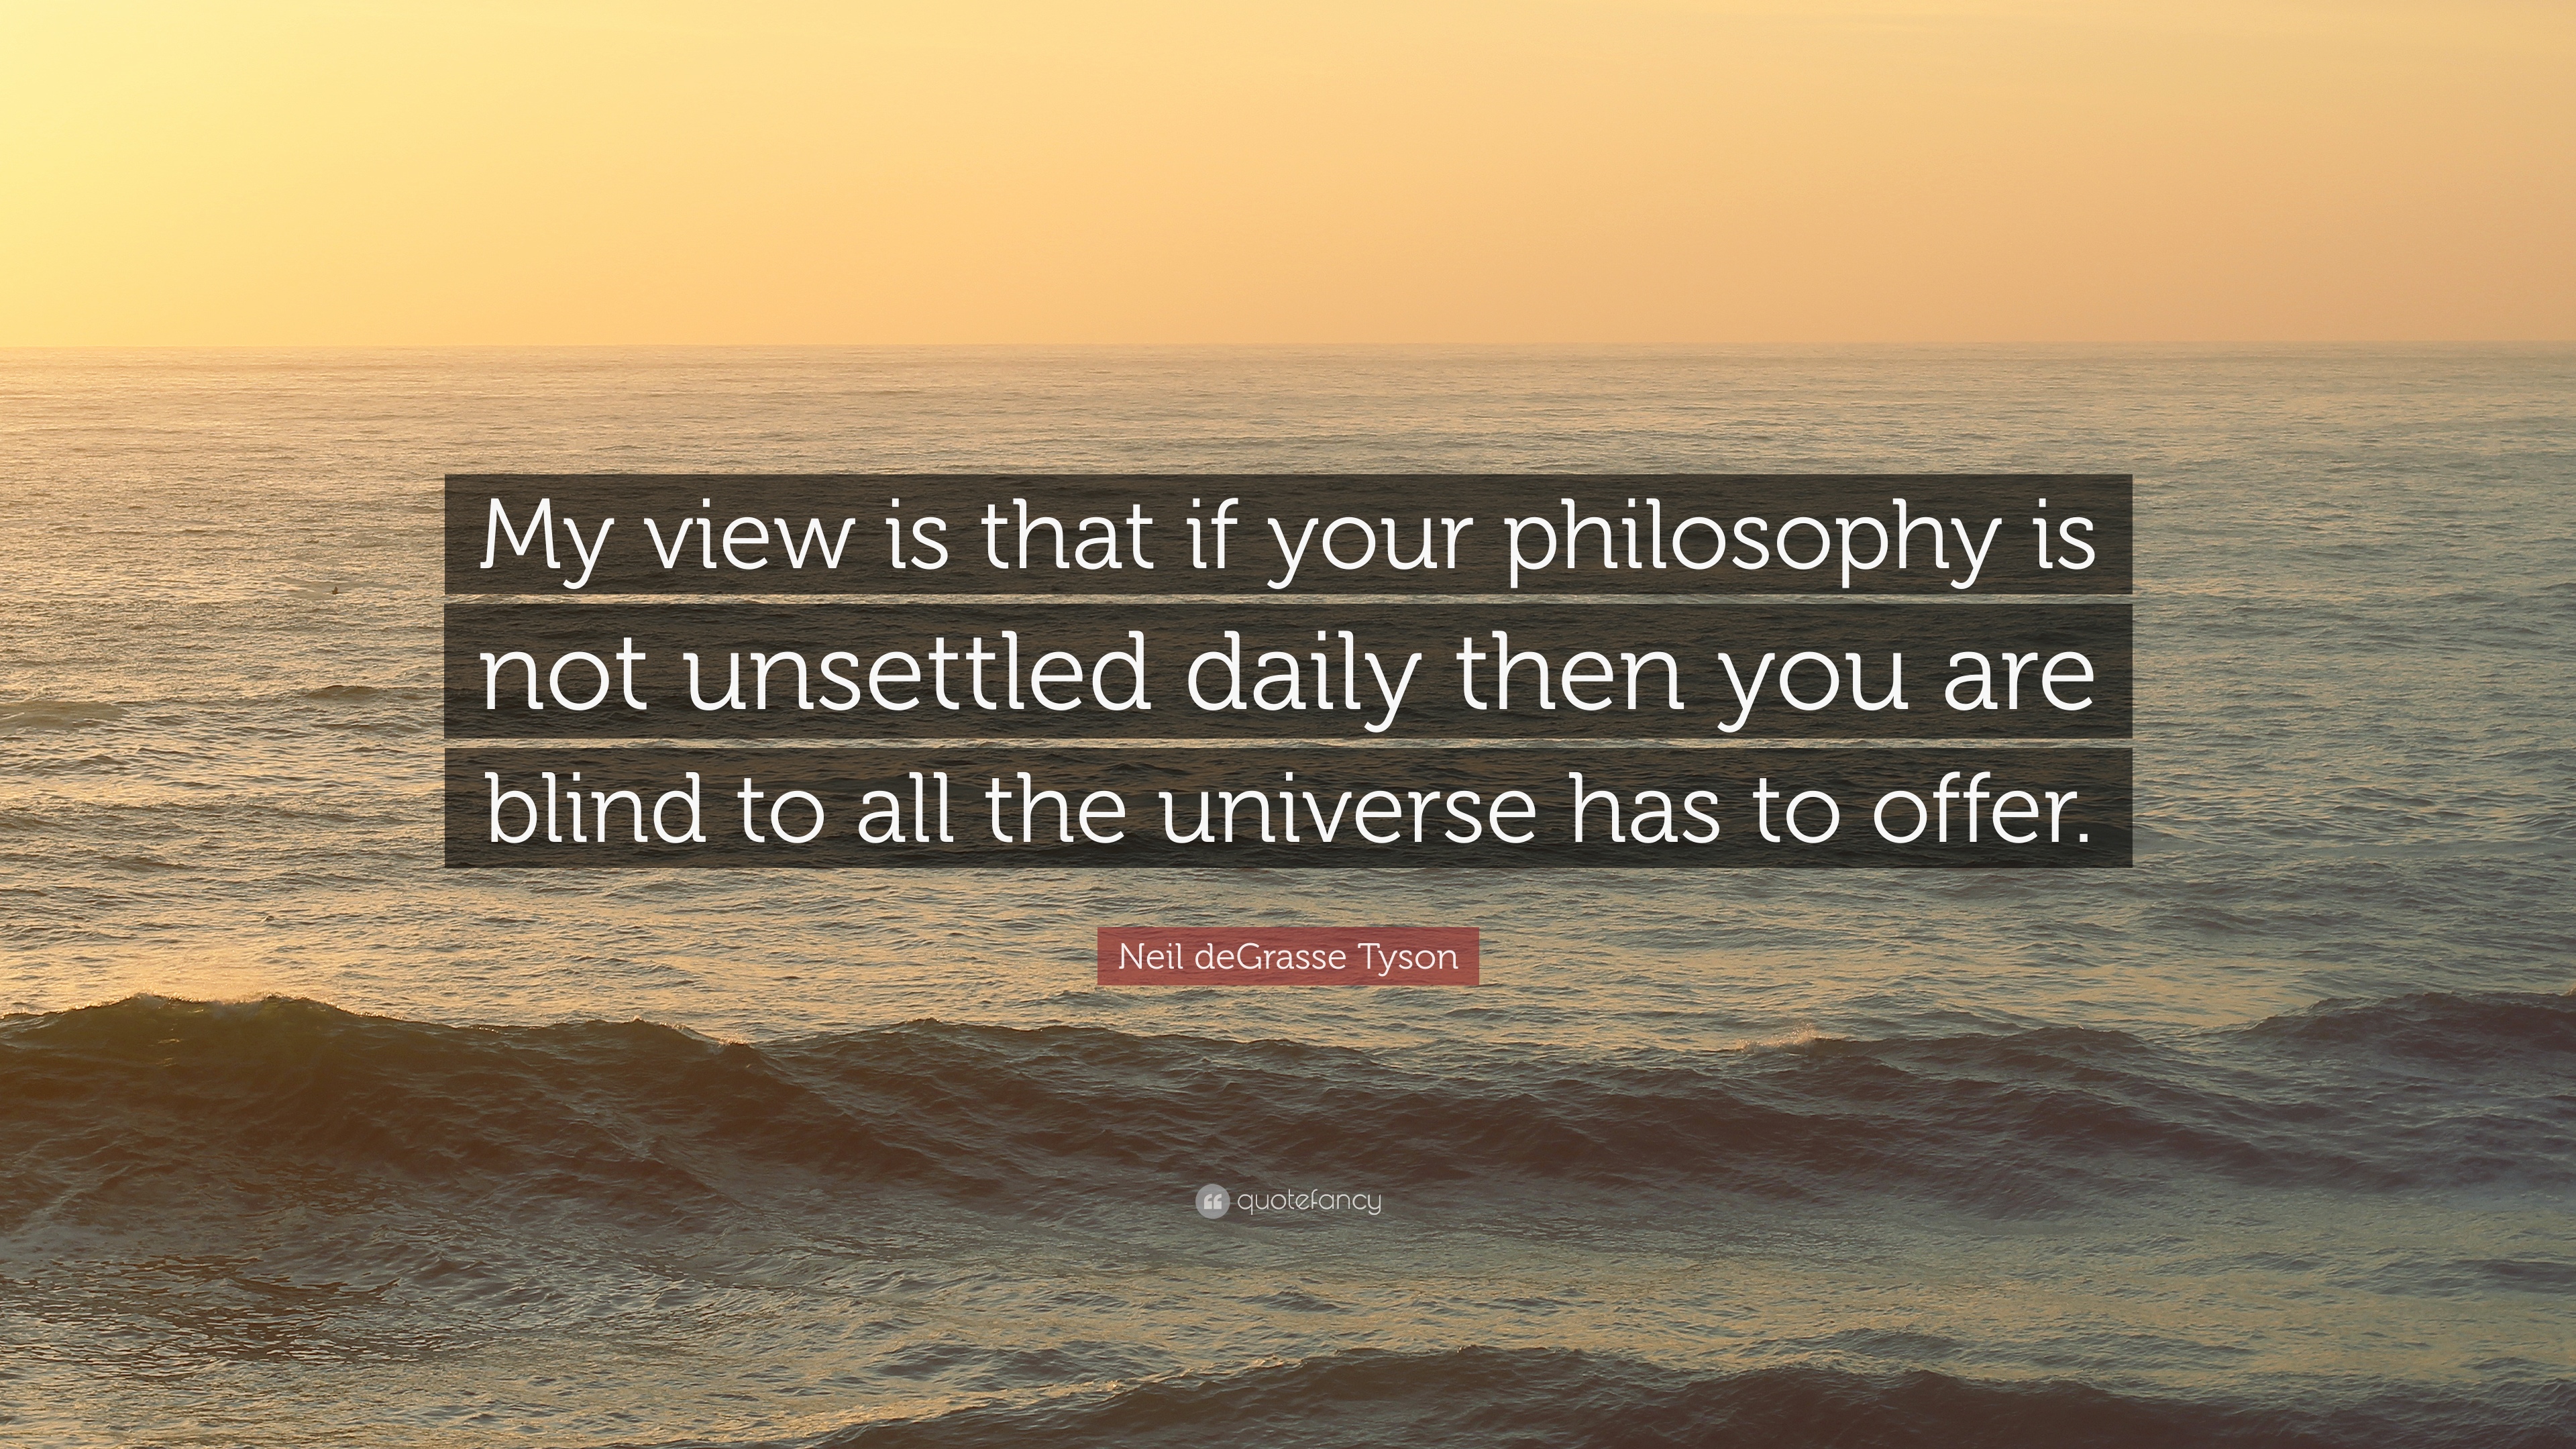 Neil deGrasse Tyson Quote: “My view is that if your philosophy is ...